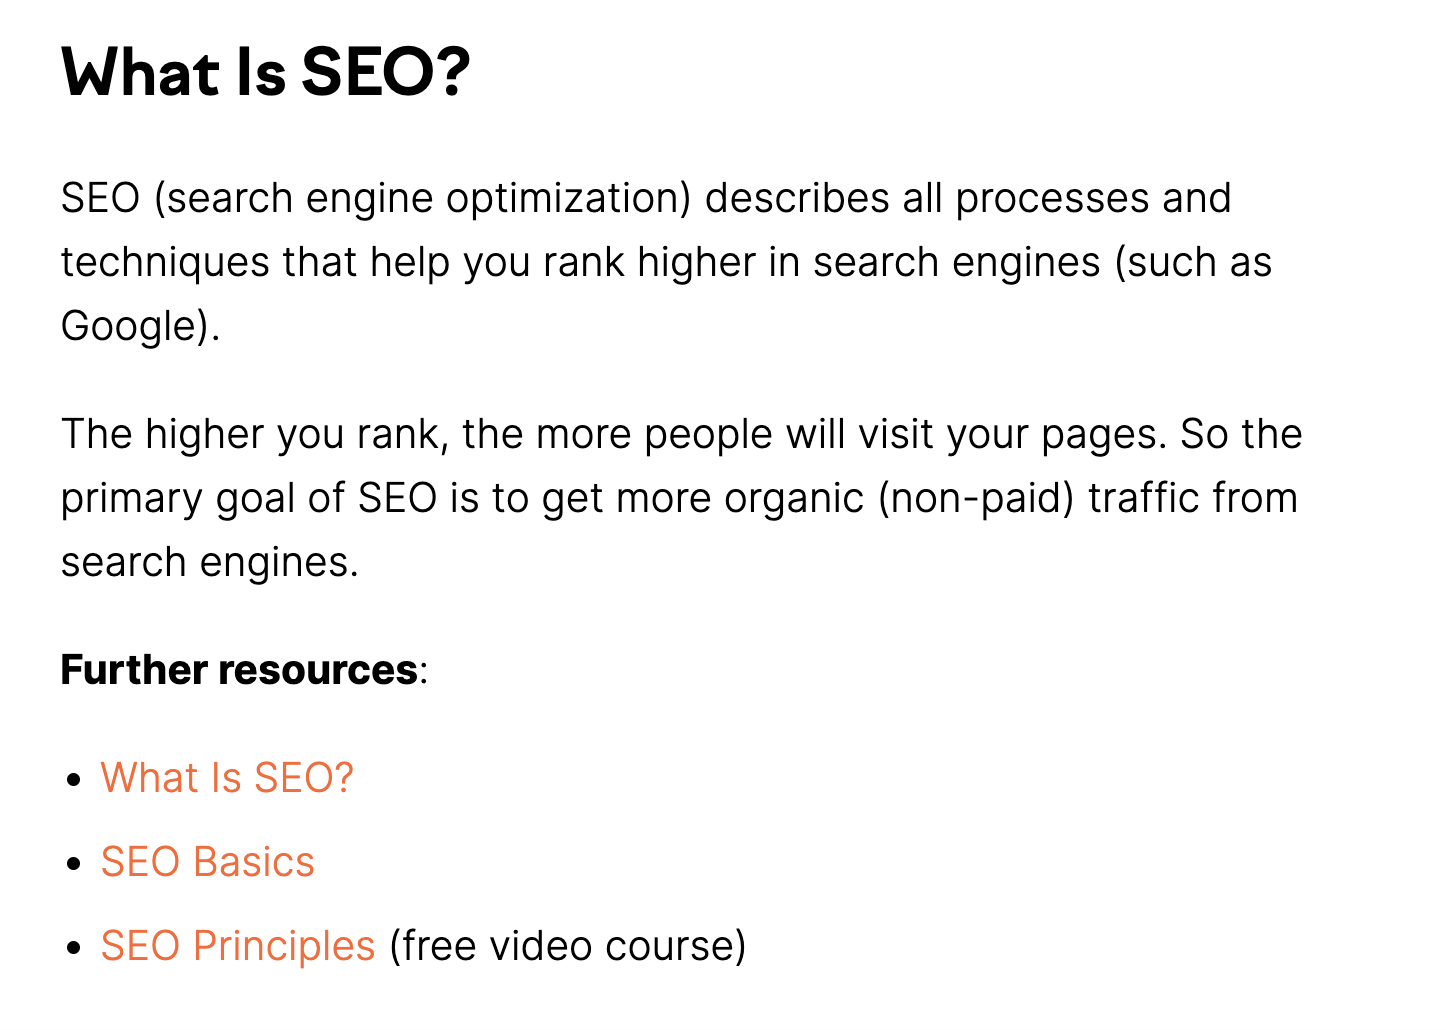 "What Is SEO?" section of the article on learning SEO